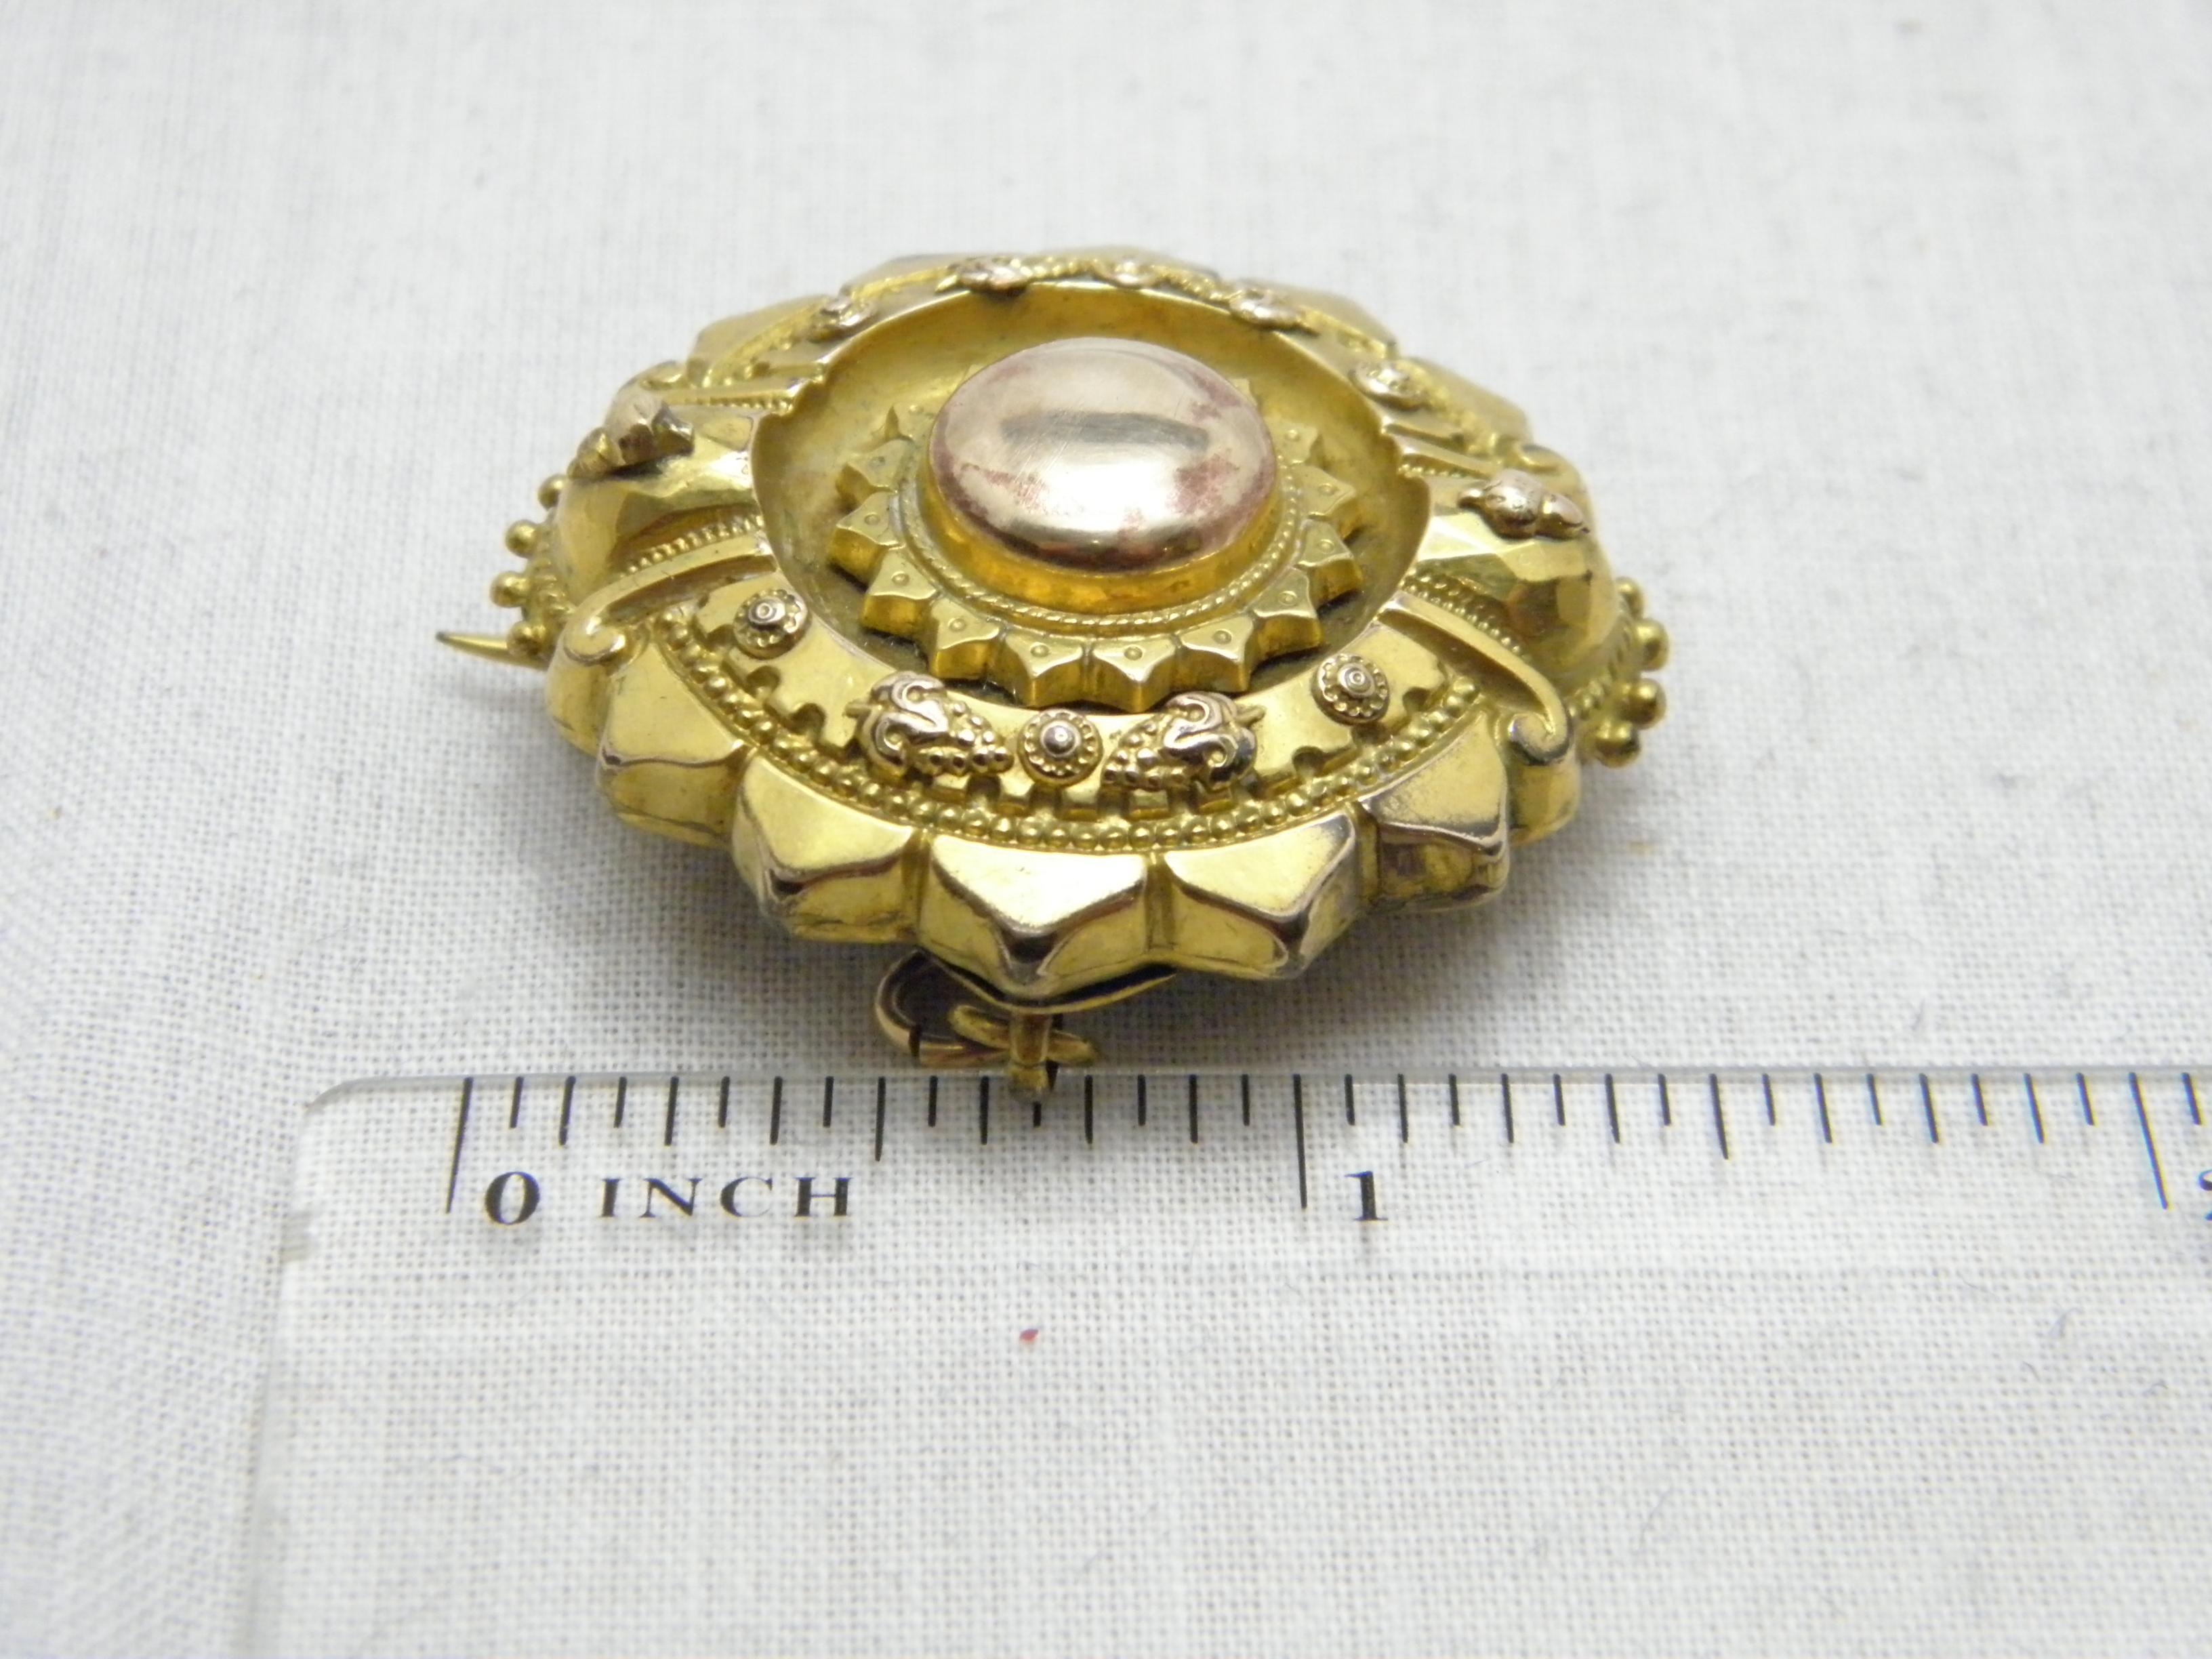 Antique 15ct Gold Locket Photo Target Brooch Pin c1810 Heavy 10g 625 Purity For Sale 6